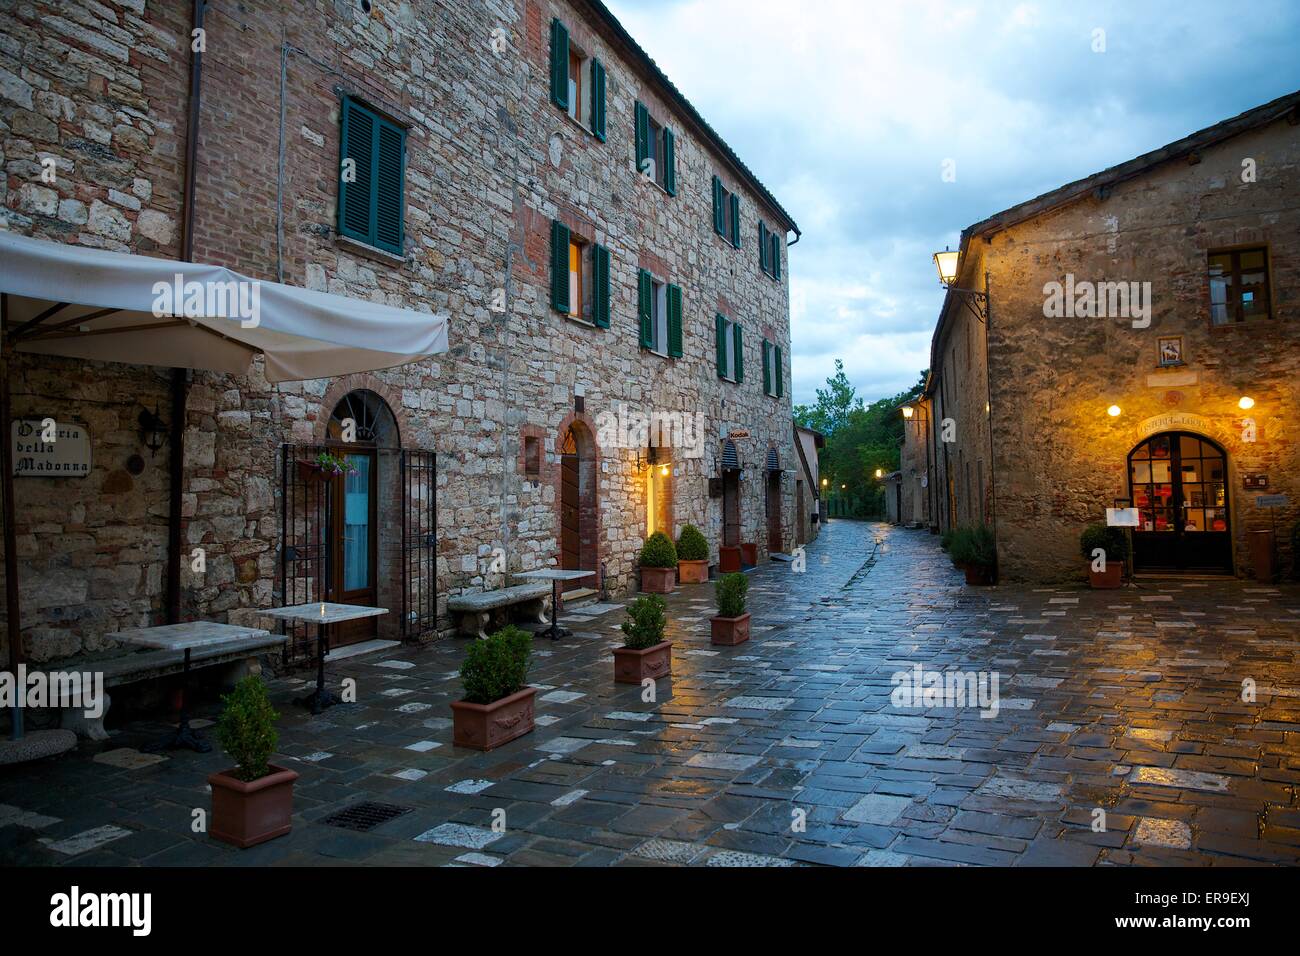 Evening in Bagno Vignoni, a small village in Tuscany with natural thermal ponds. Stock Photo